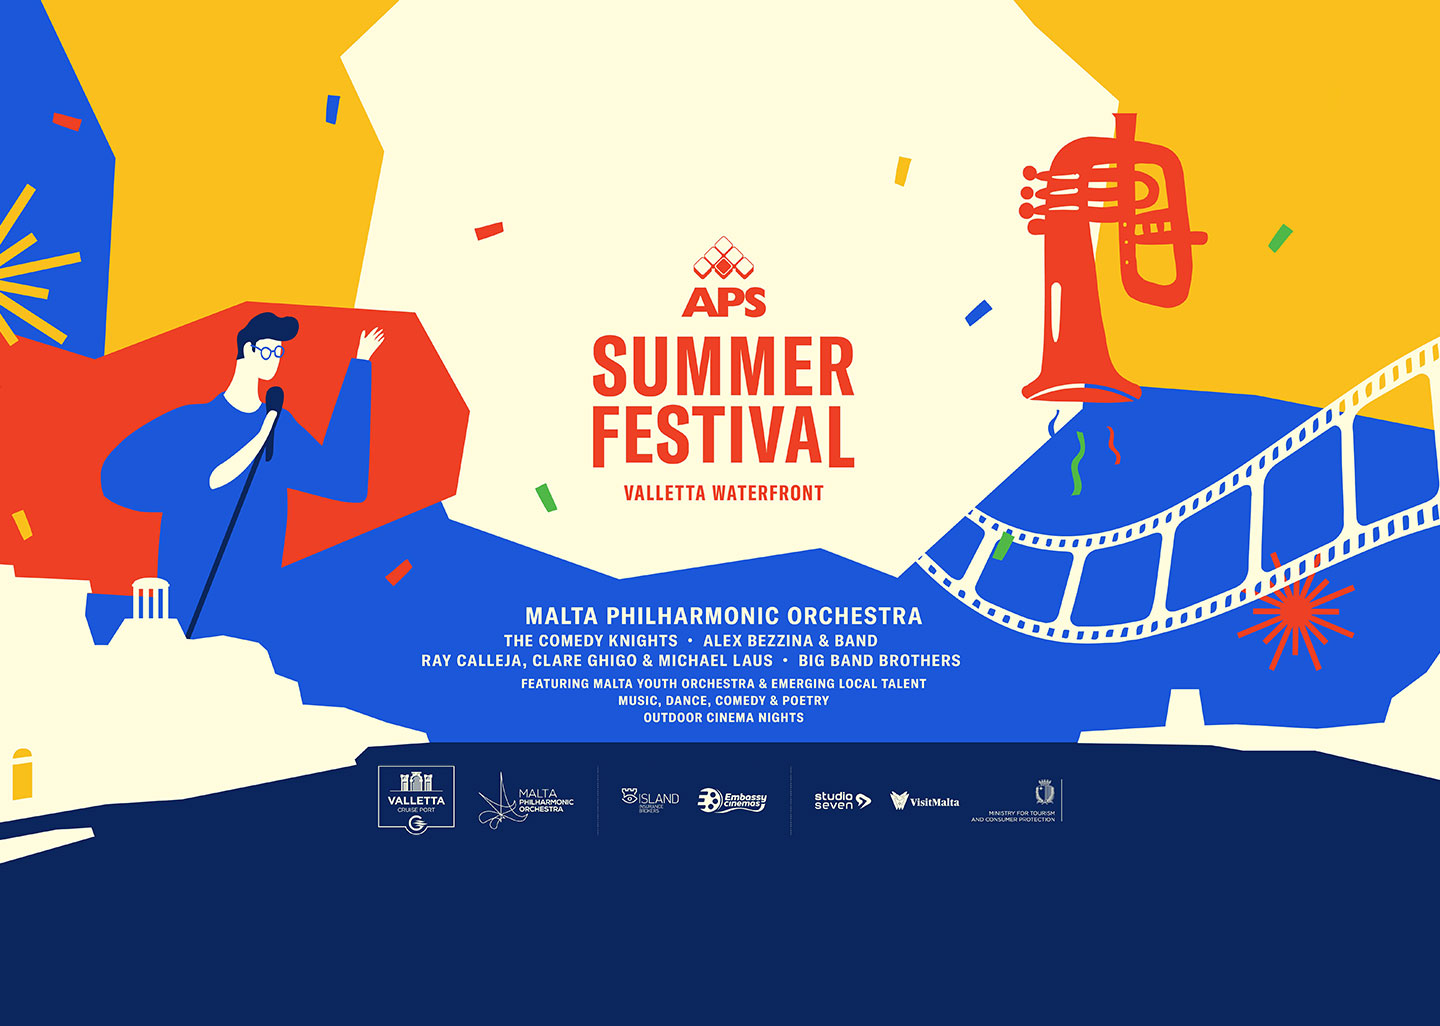 APS Summer Festival extended to mid-August